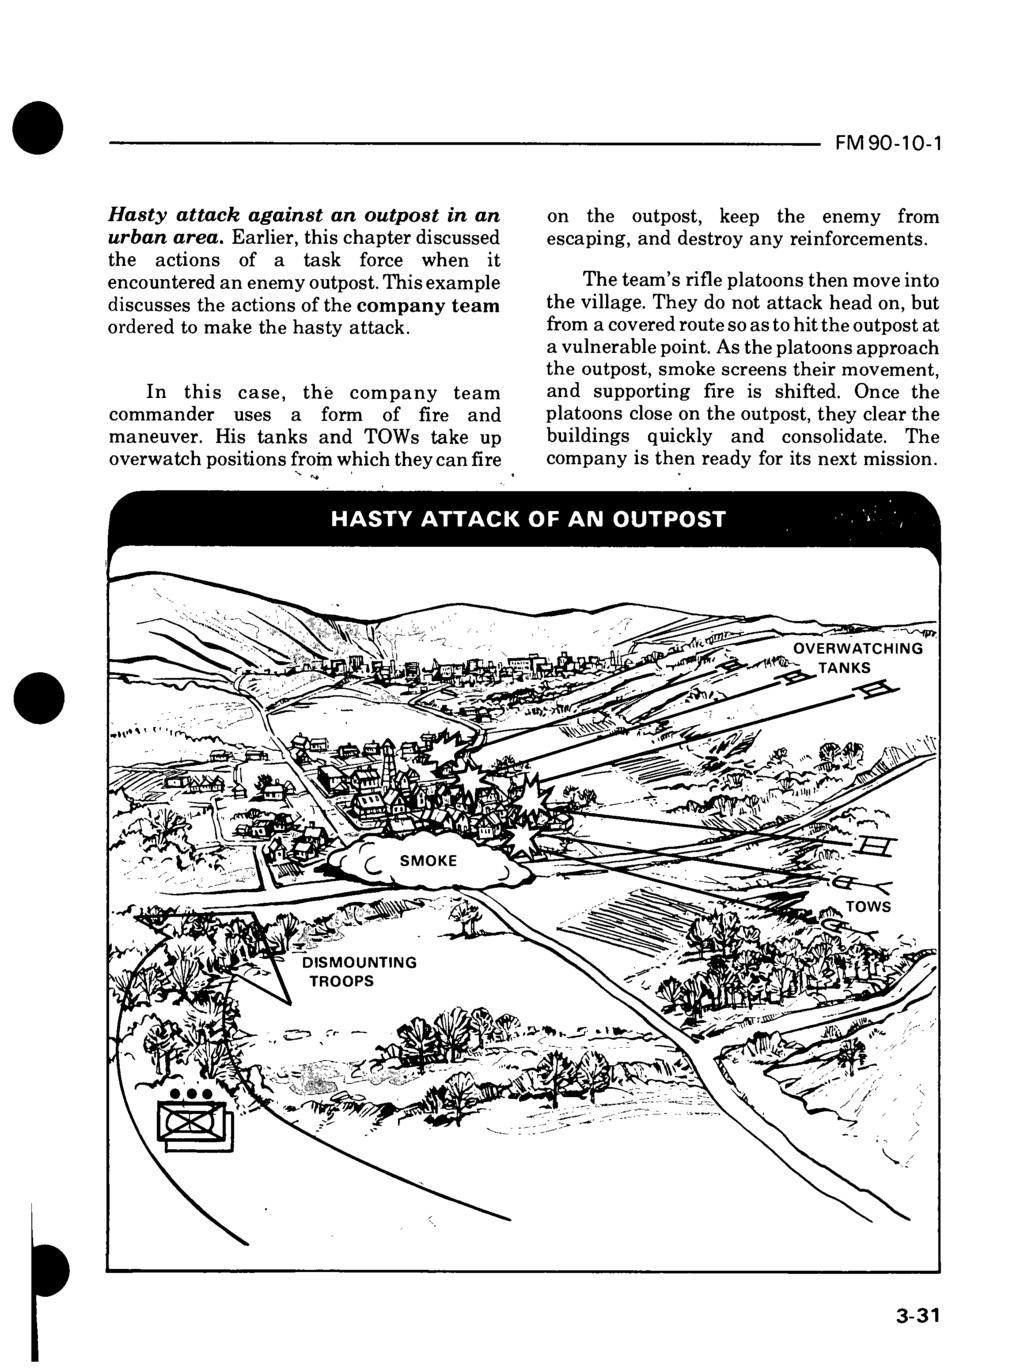 Hasty attack against an outpost in an urban area. Earlier, this chapter discussed the actions of a task force when it encountered an enemy outpost.